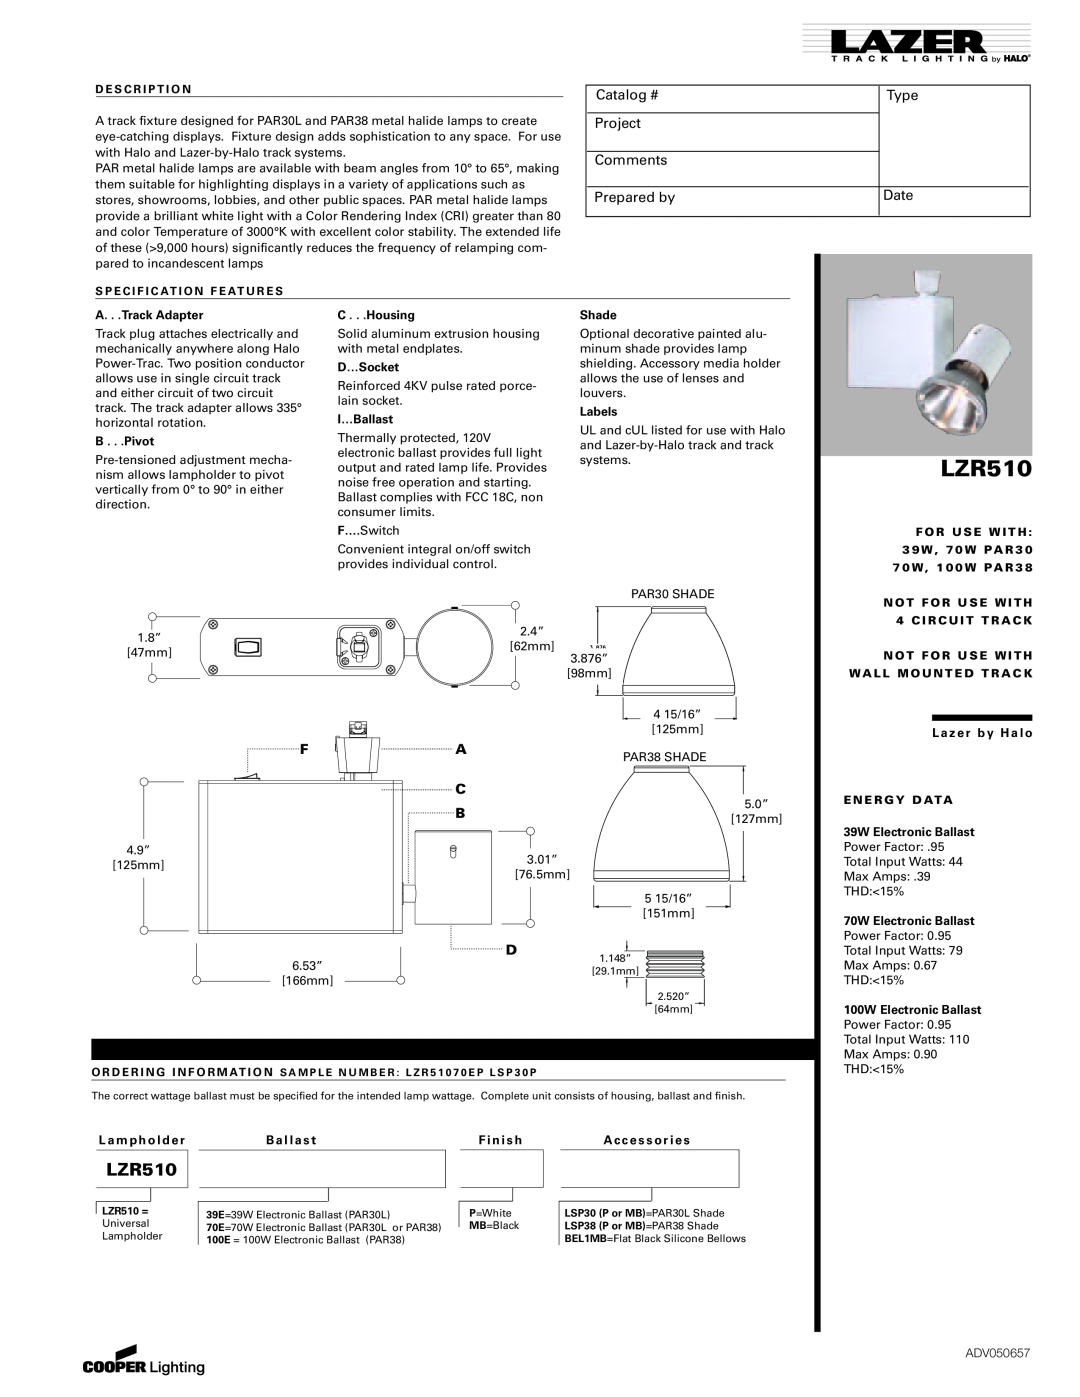 Cooper Lighting LZR510 manual Catalog #, Type, Project, Comments, Prepared by, Date 